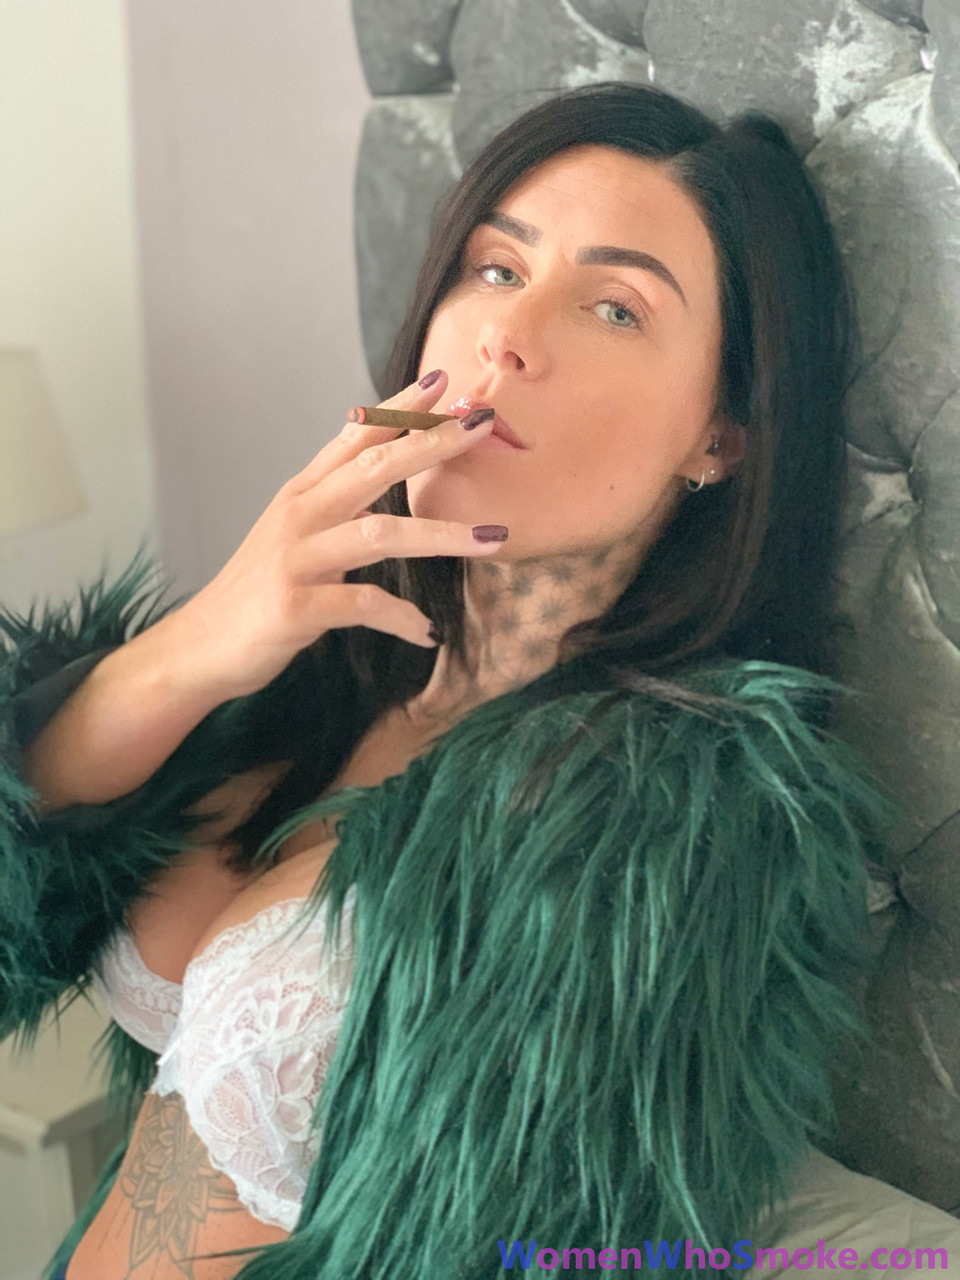 Stunning brunette teases with her big boobs while smoking in sexy lingerie порно фото #426607871 | Women Who Smoke Pics, Smoking, мобильное порно